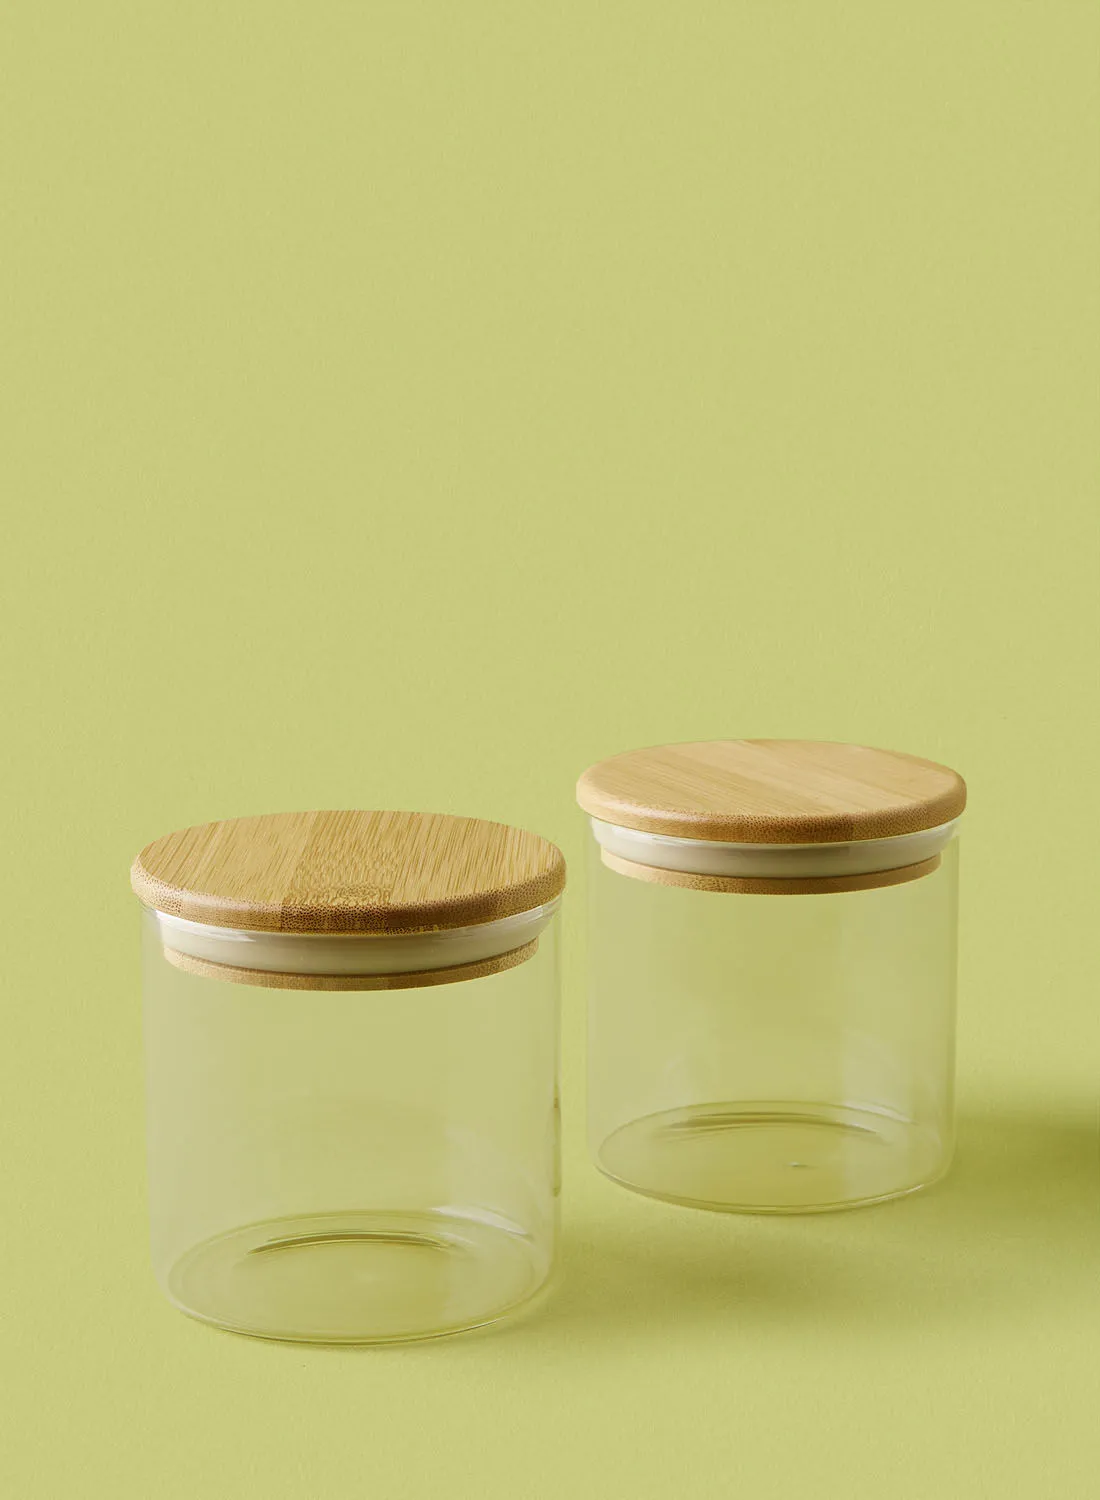 Noon East 2 Piece Glass Food Storage Container Set - 500 ml Each - Airtight Bamboo Lids - Food Storage Box - Storage Boxes - Kitchen Cabinet Organizers - Glass Food Container - Clear Clear 2-Piece - 500ml